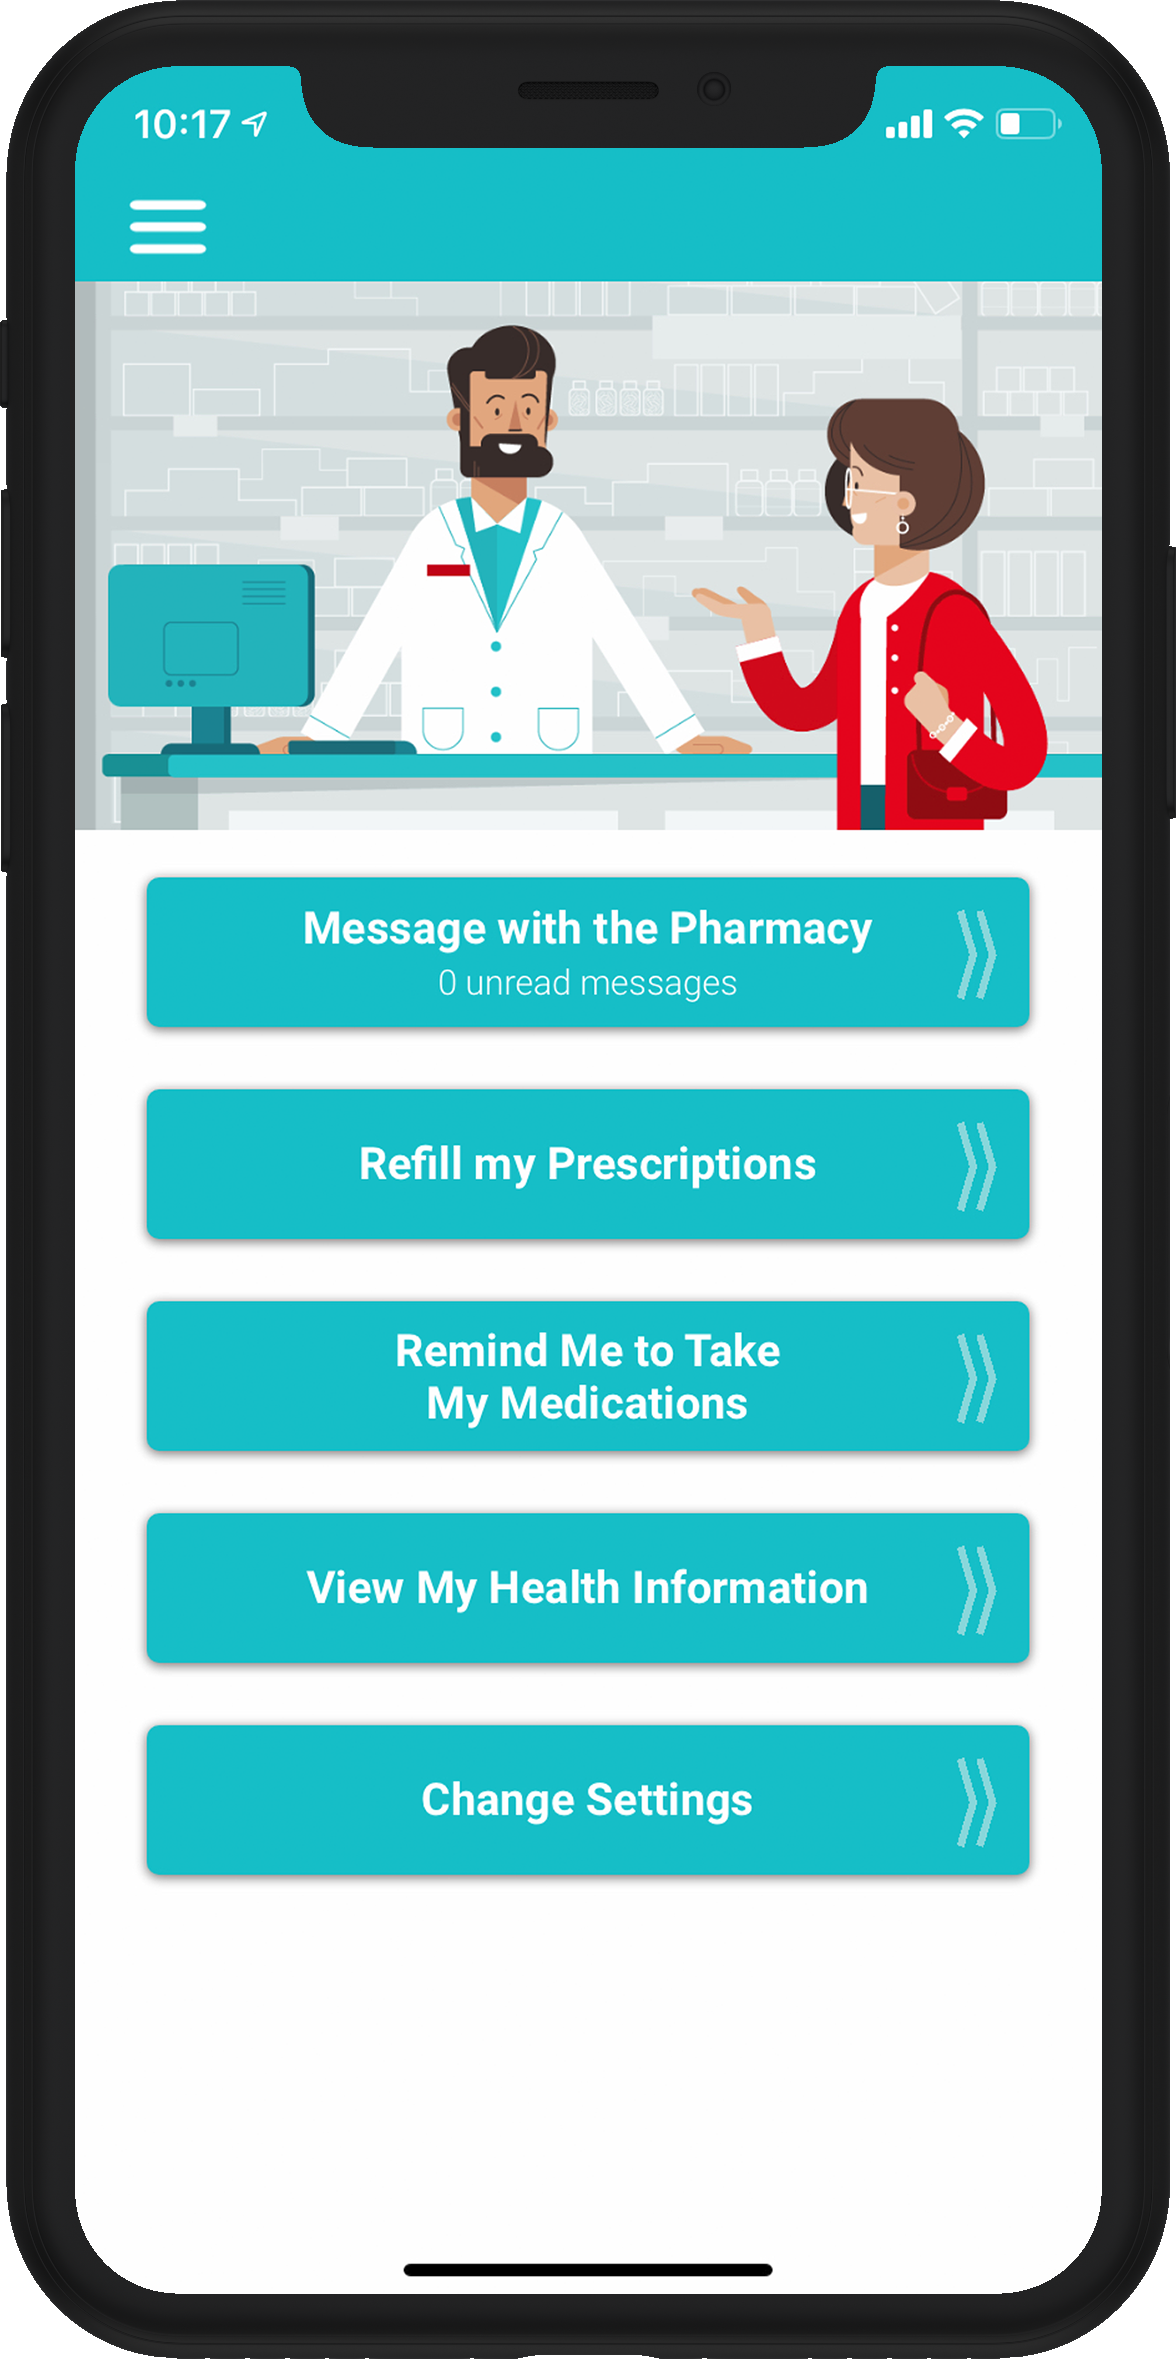 Phone with the display showing the mobile app called RxLocal that users can download to connect with the pharmacy